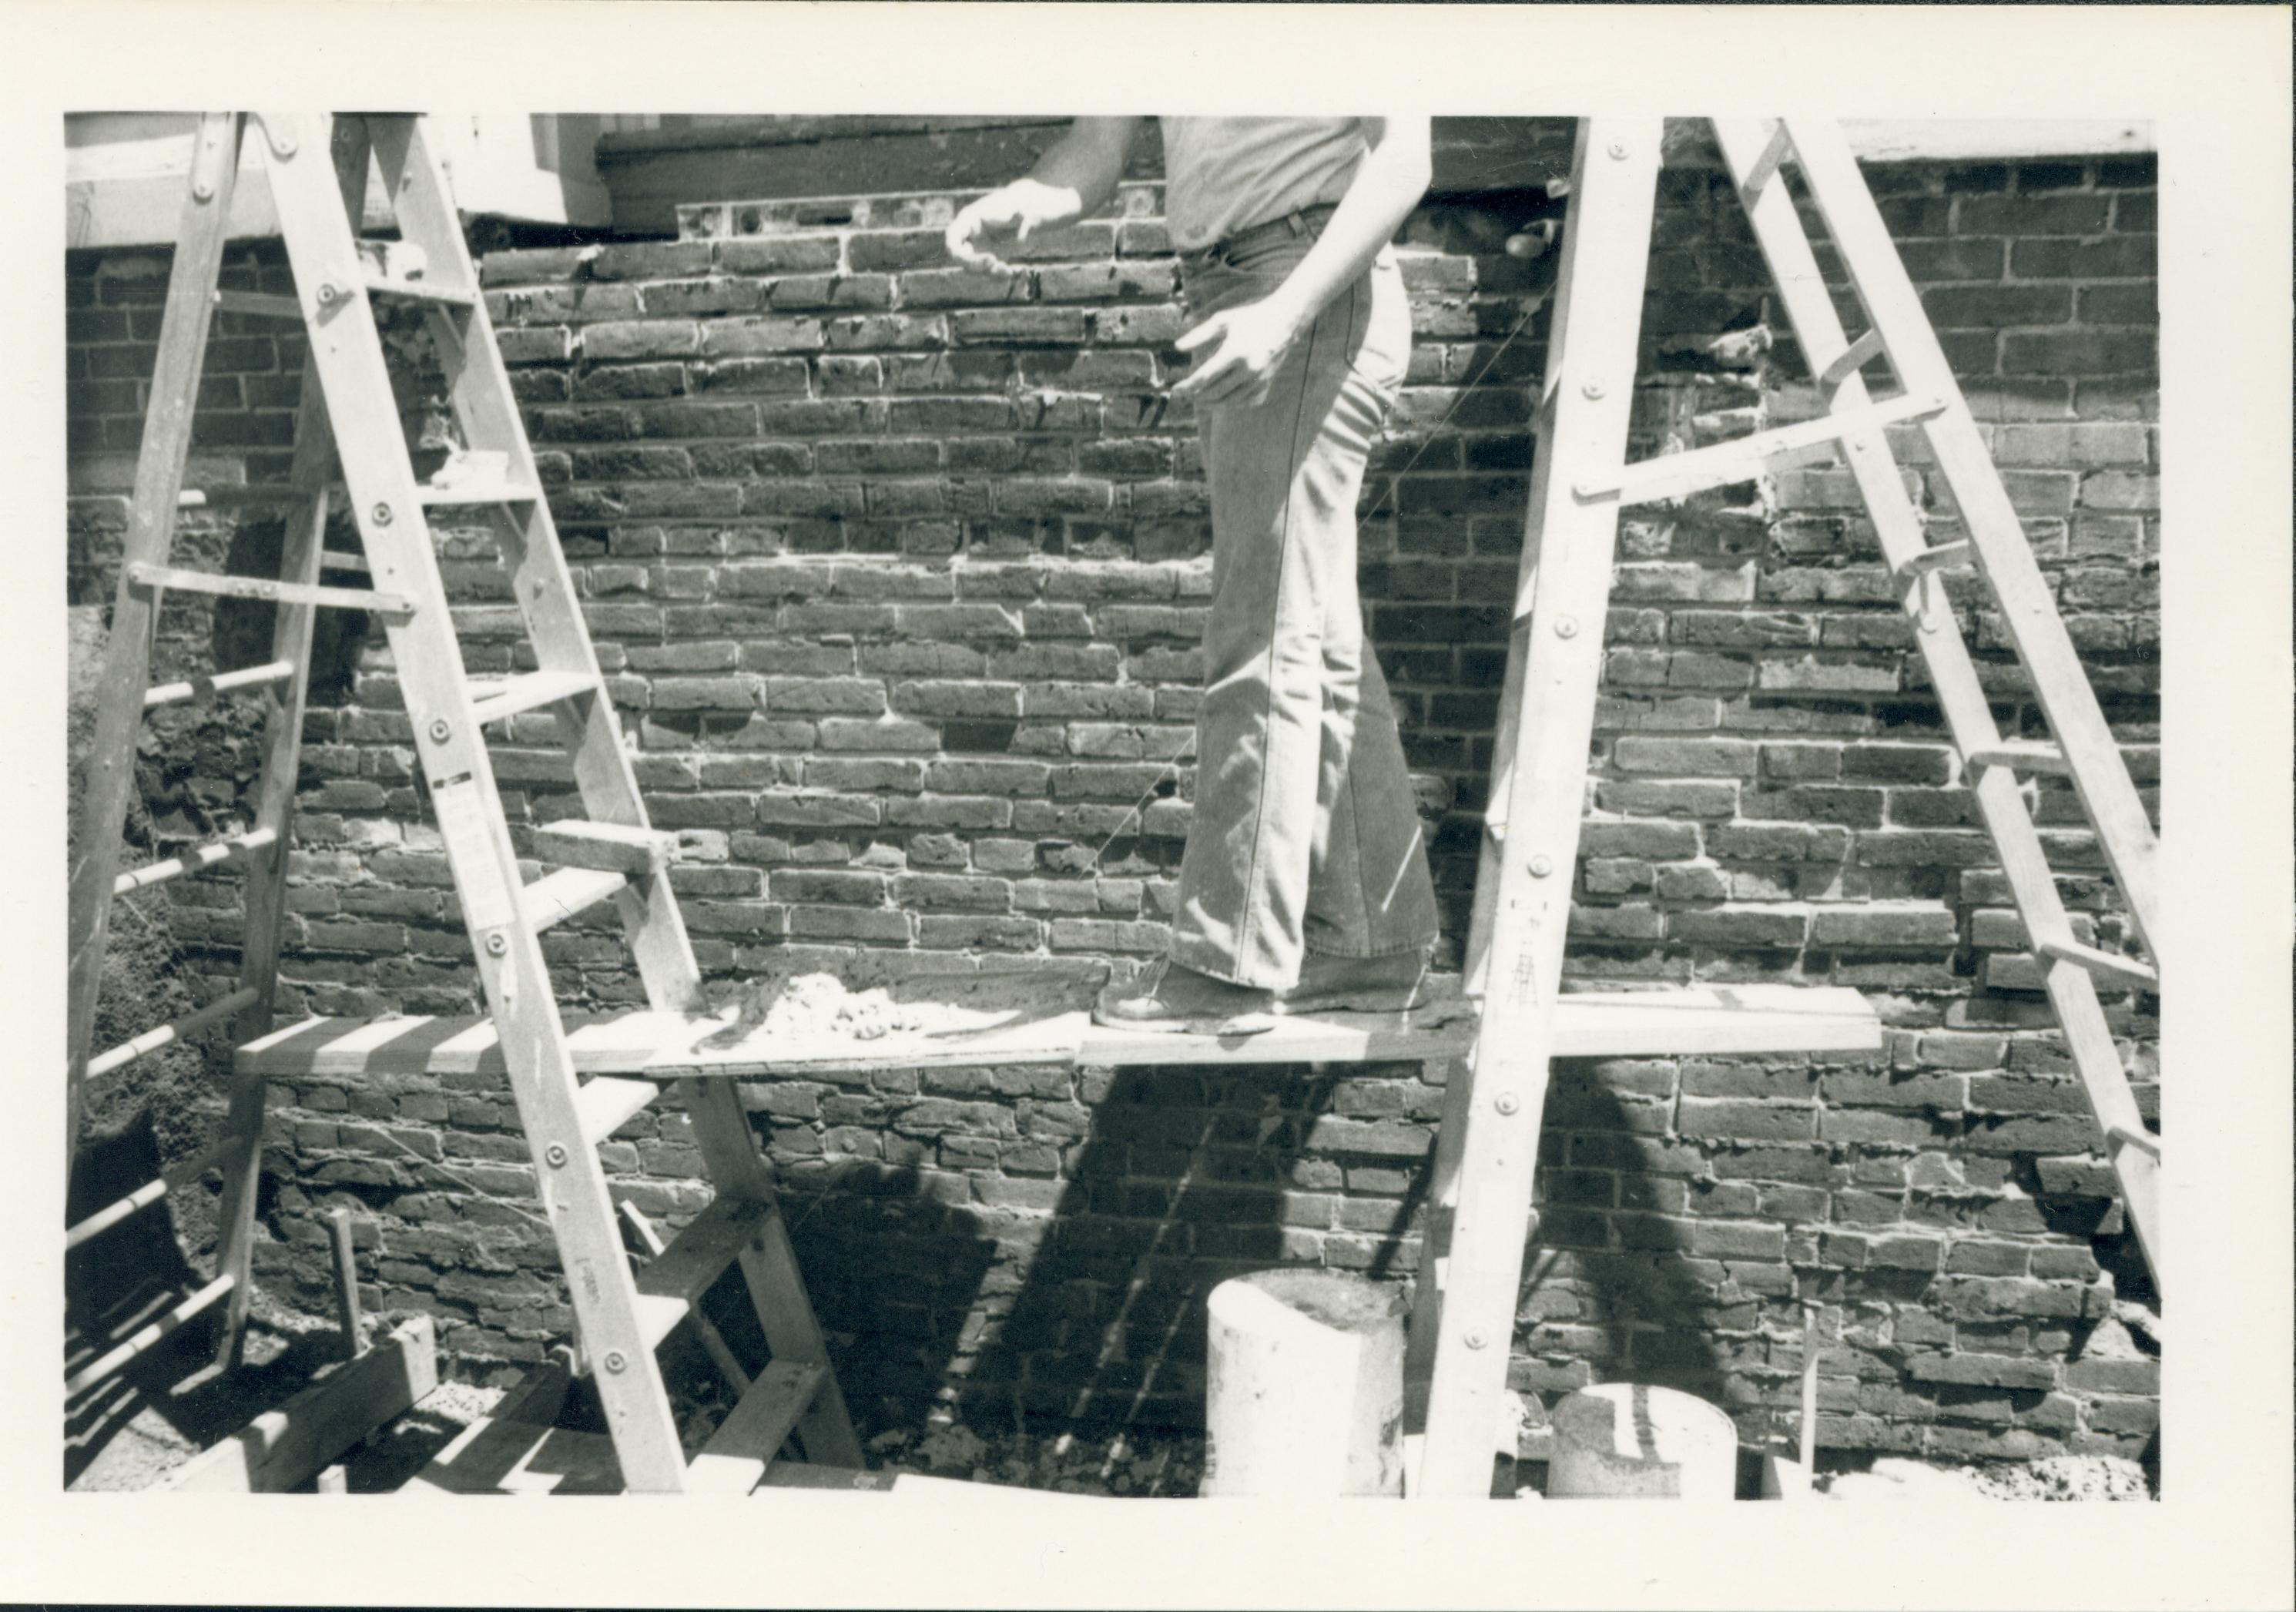 Two ladders in a trench alongside an exposed section of the Lincoln Home foundation during the 1987-1988 restoration. A single worker is standing on a platform supported by the two ladders. The west entrance to the Lincoln Home can be seen at top.